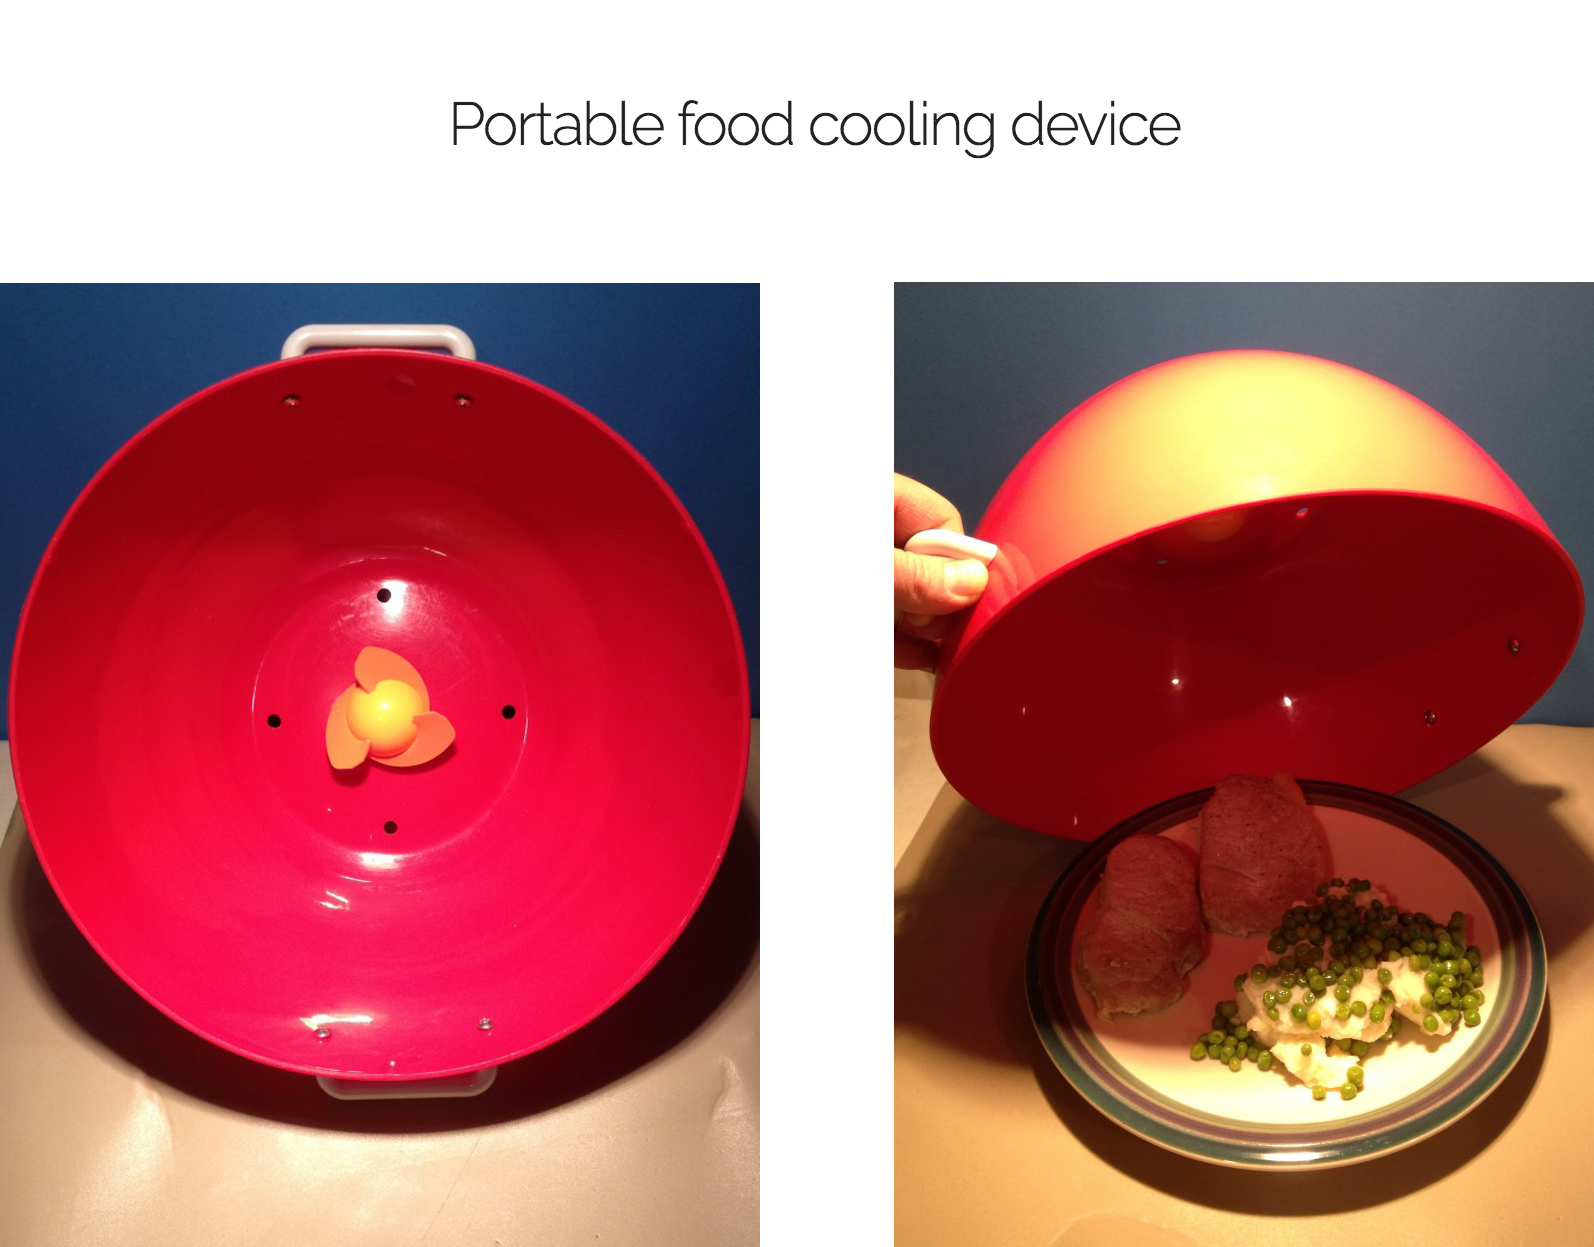 lighting - Portable food cooling device